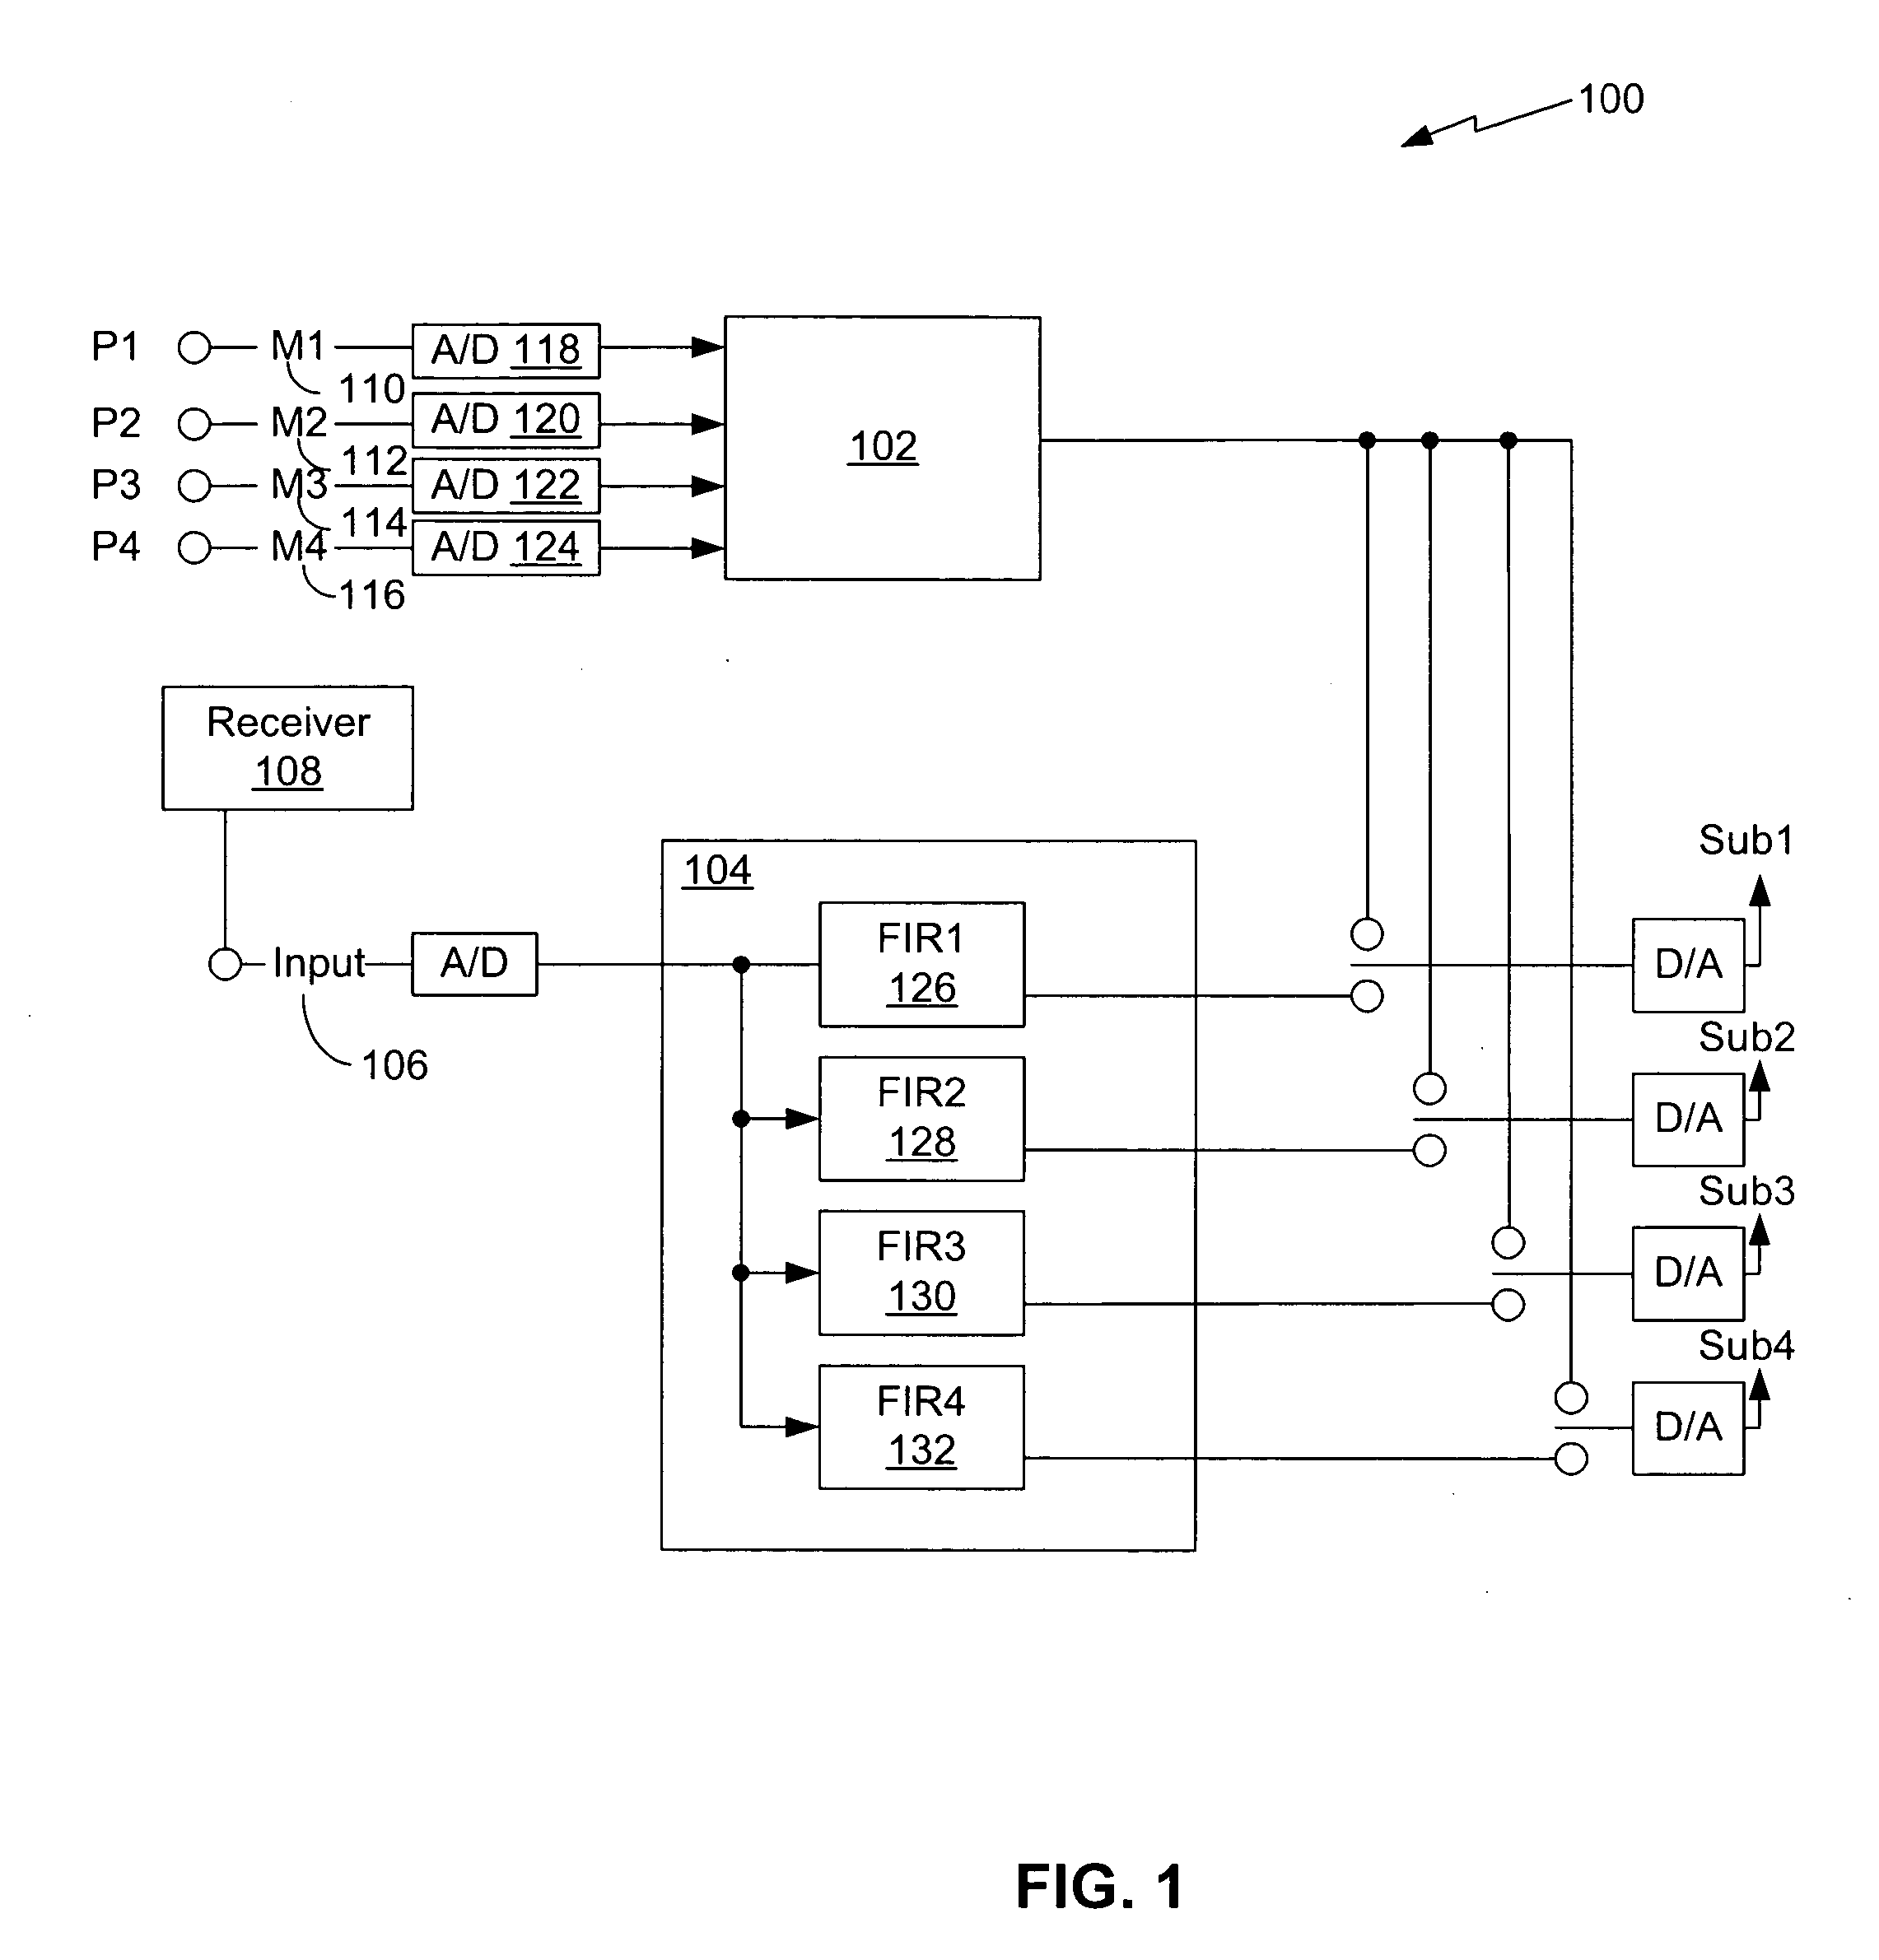 Reduced latency low frequency equalization system